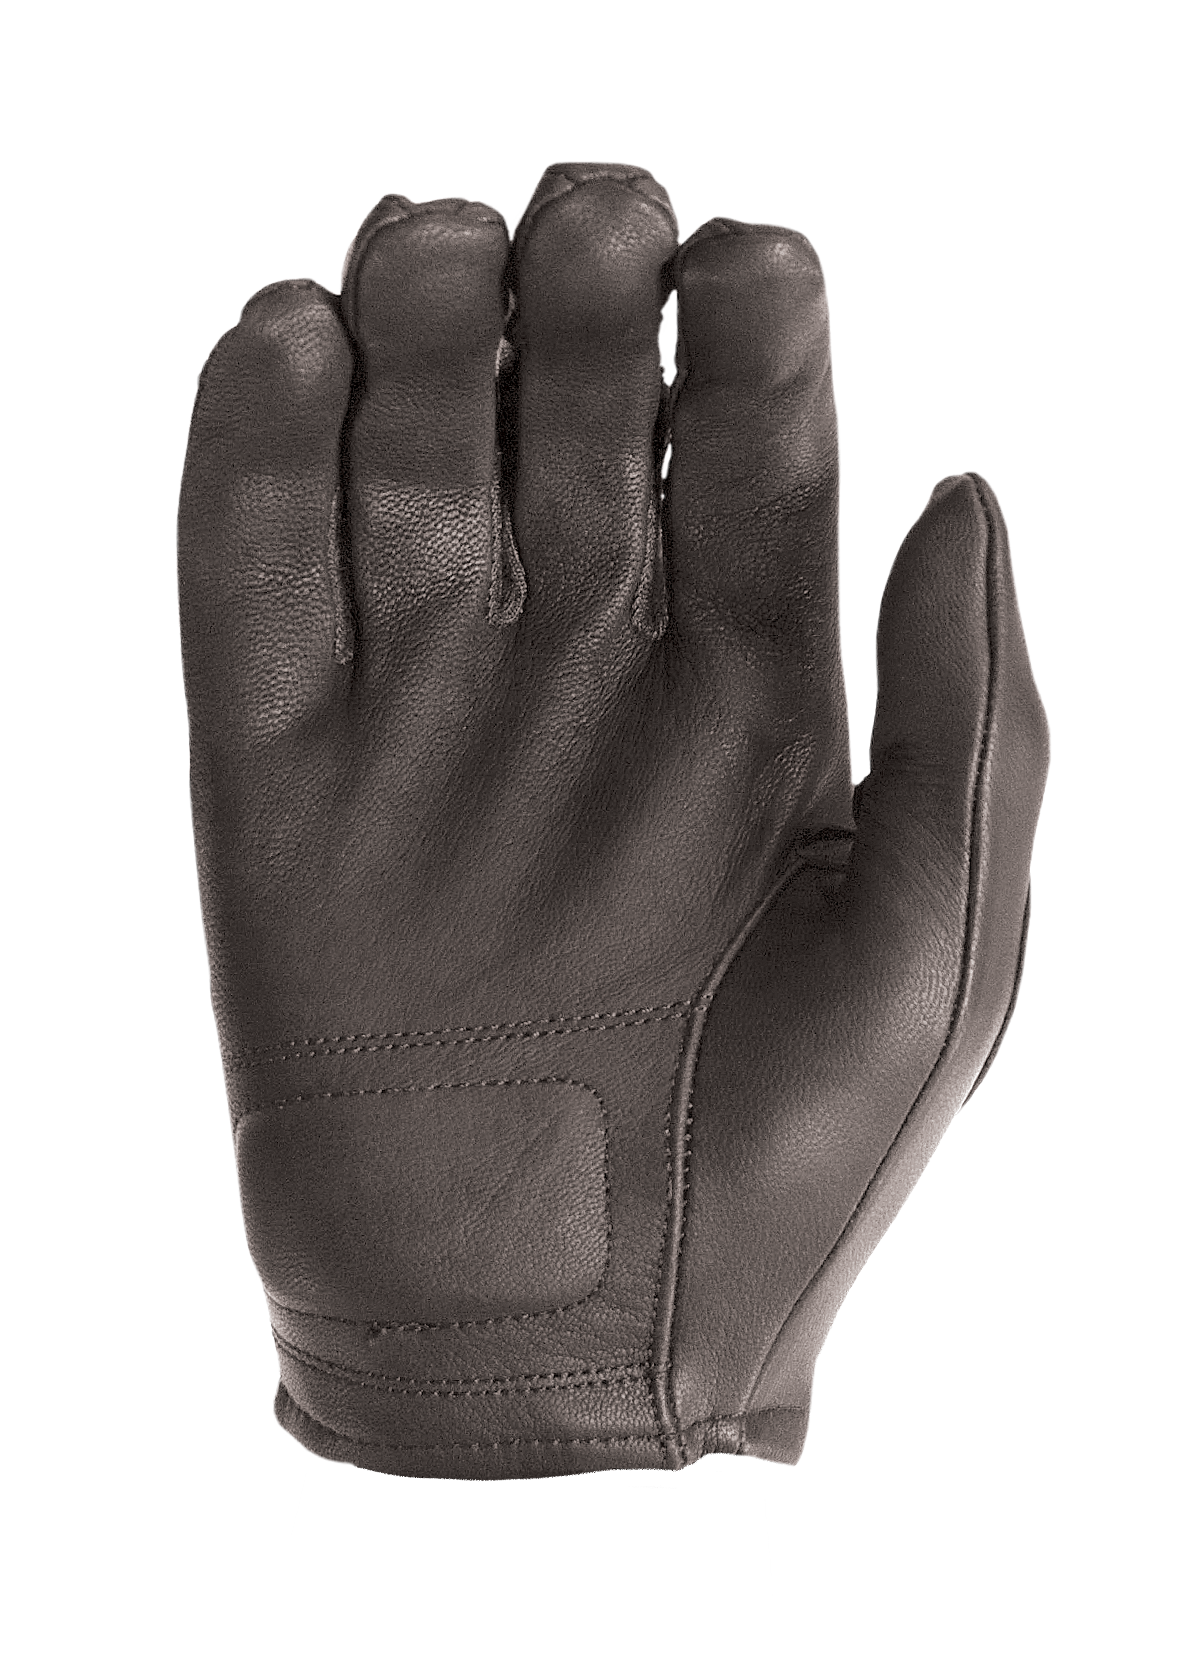 Ergonomic Cut Leather Police Driving Gloves 